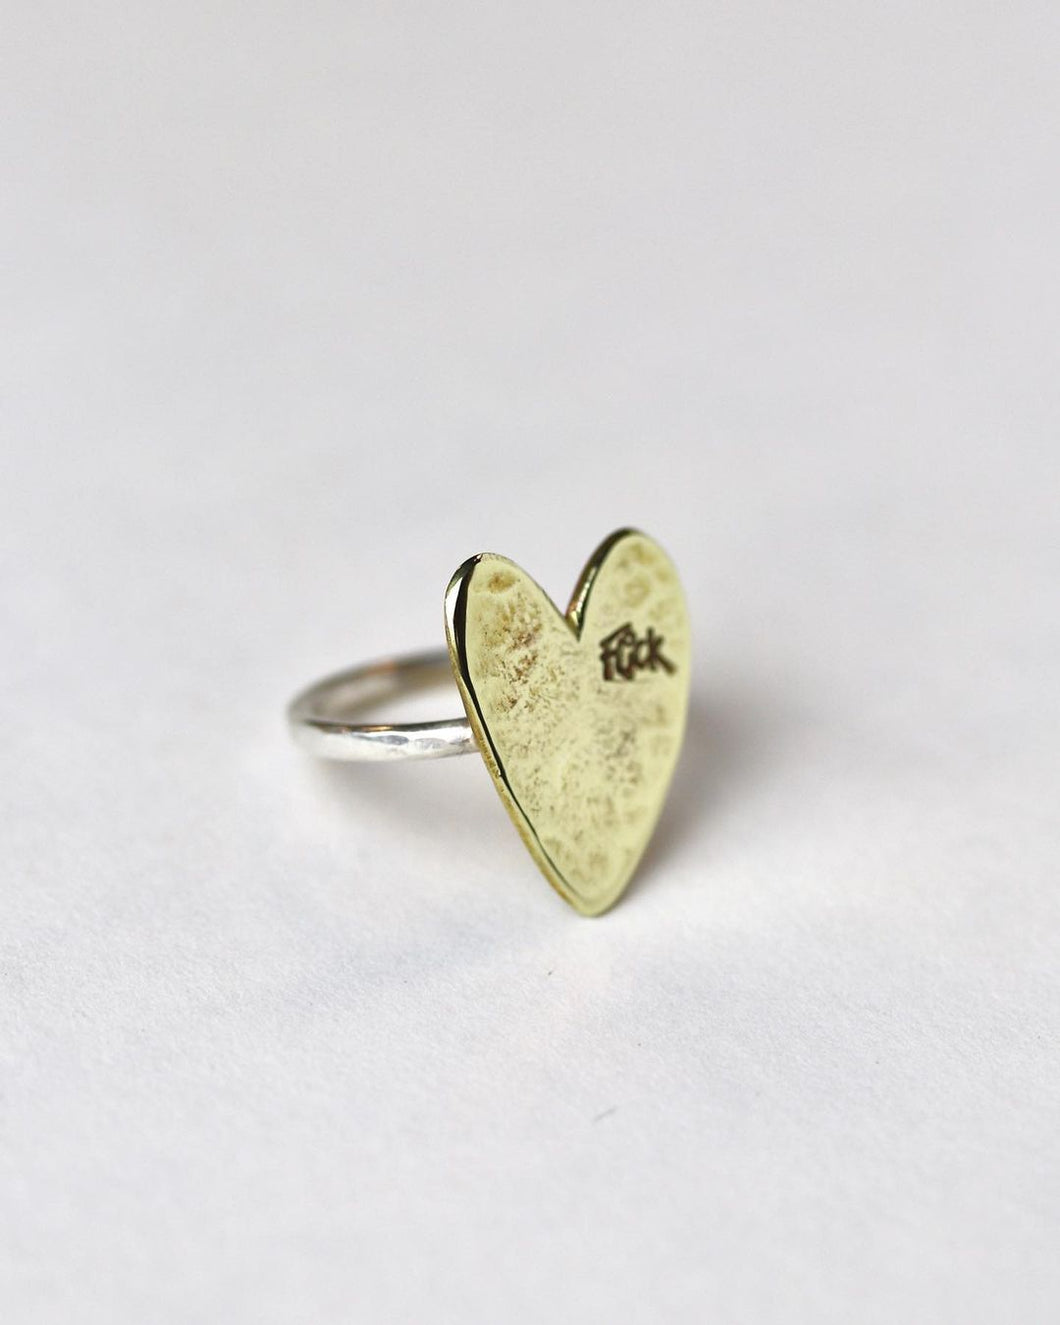 Flick Heart Ring, Brass and Silver